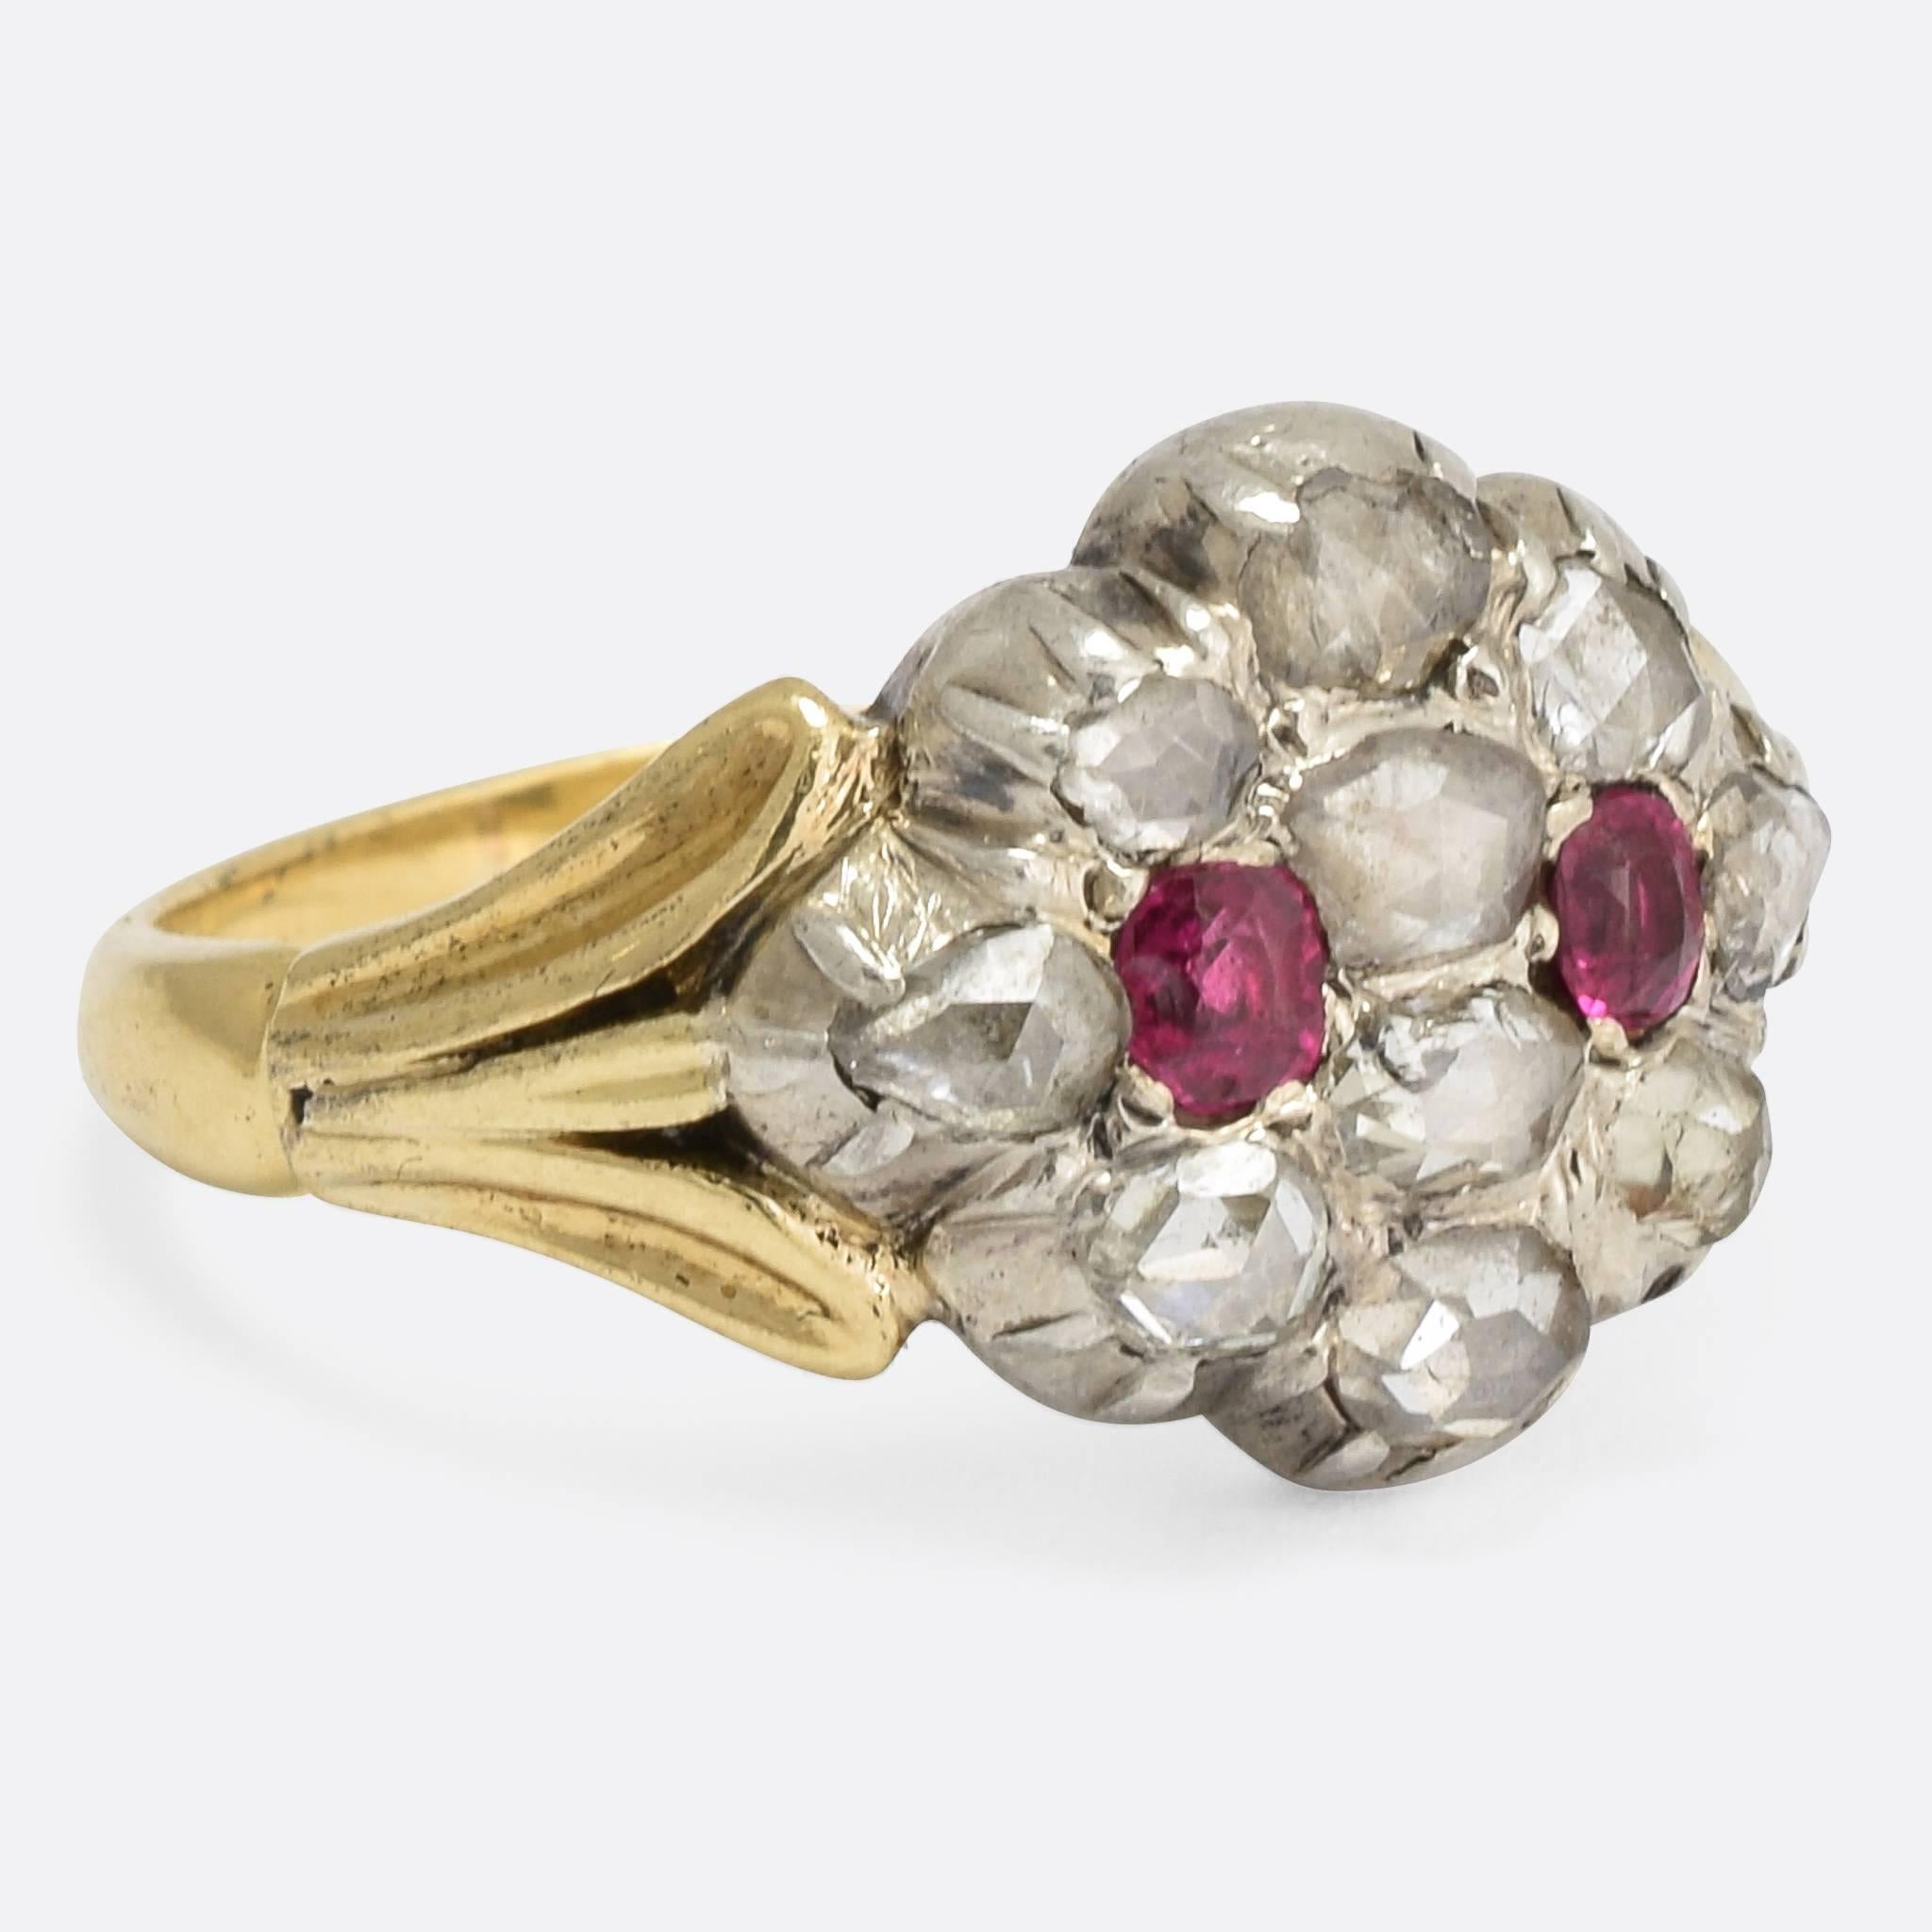 A cool Georgian cluster ring, set with rose cut diamonds and rubies in foil-backed settings. It's modelled in 15k yellow gold, with silver settings typical of the period, and attractive trifurcated shoulders. The stones are bright and full of